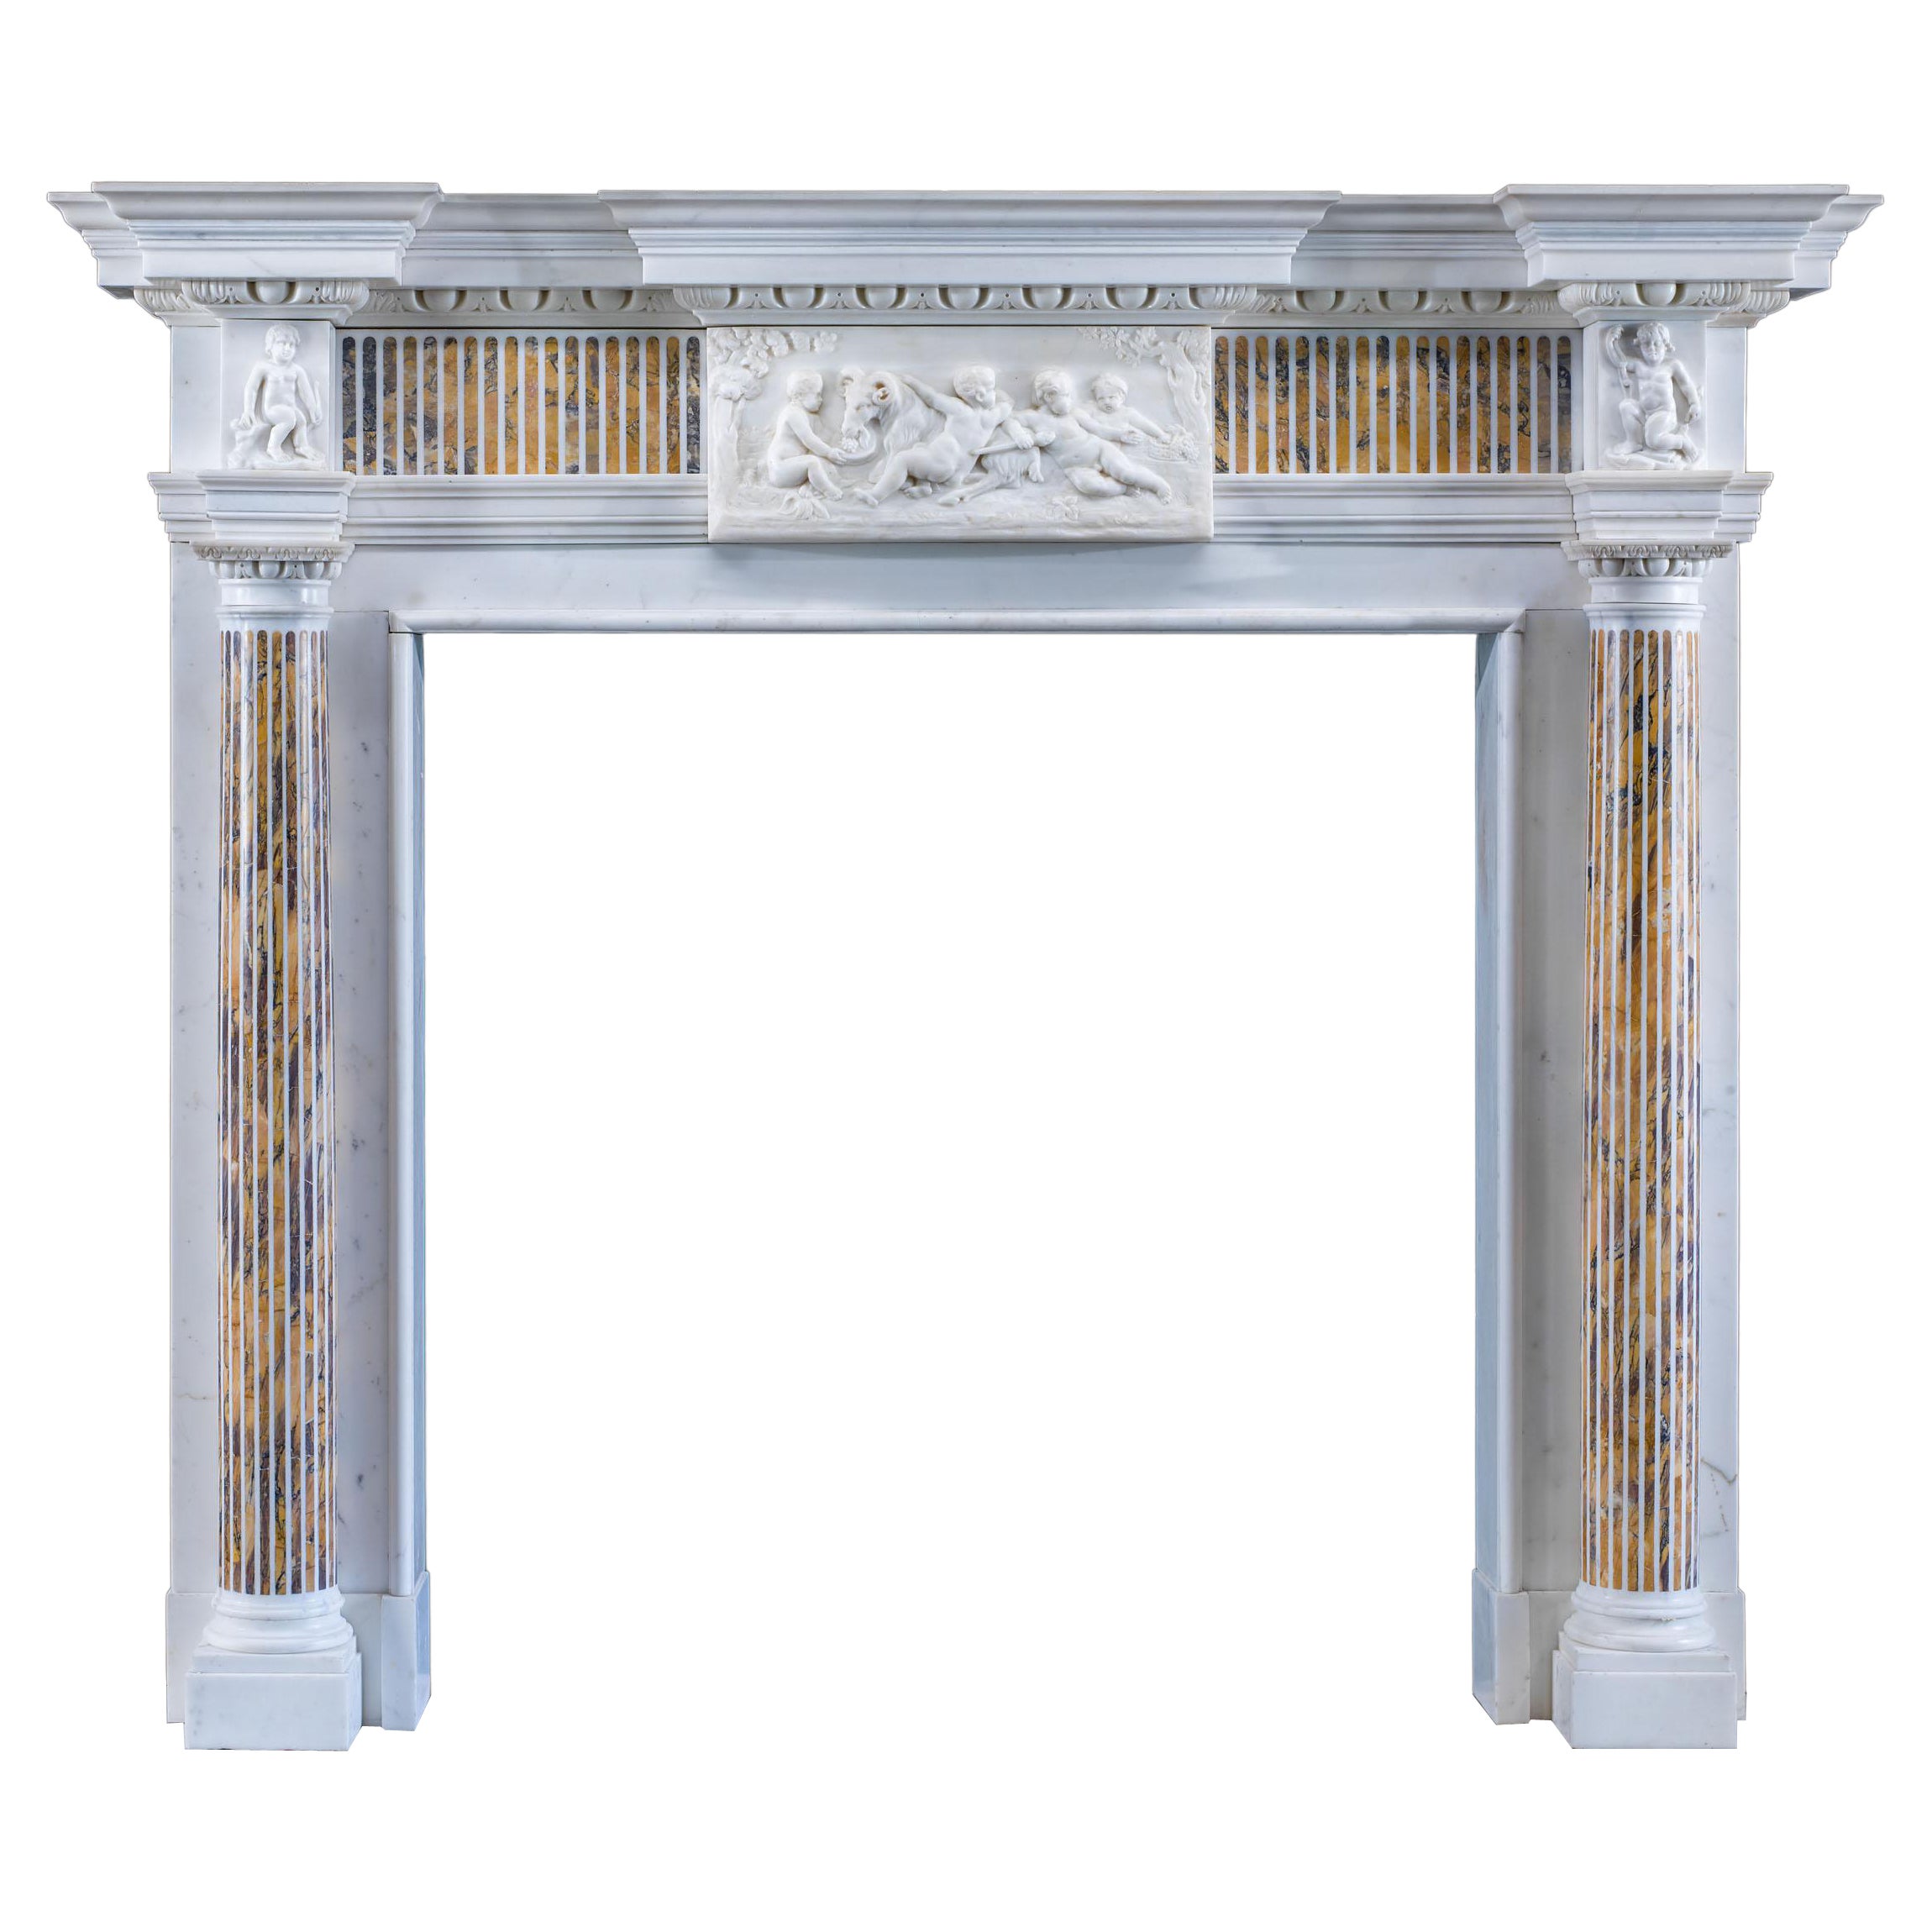 Fine Neoclassical Siena Inlaid Chimneypiece For Sale